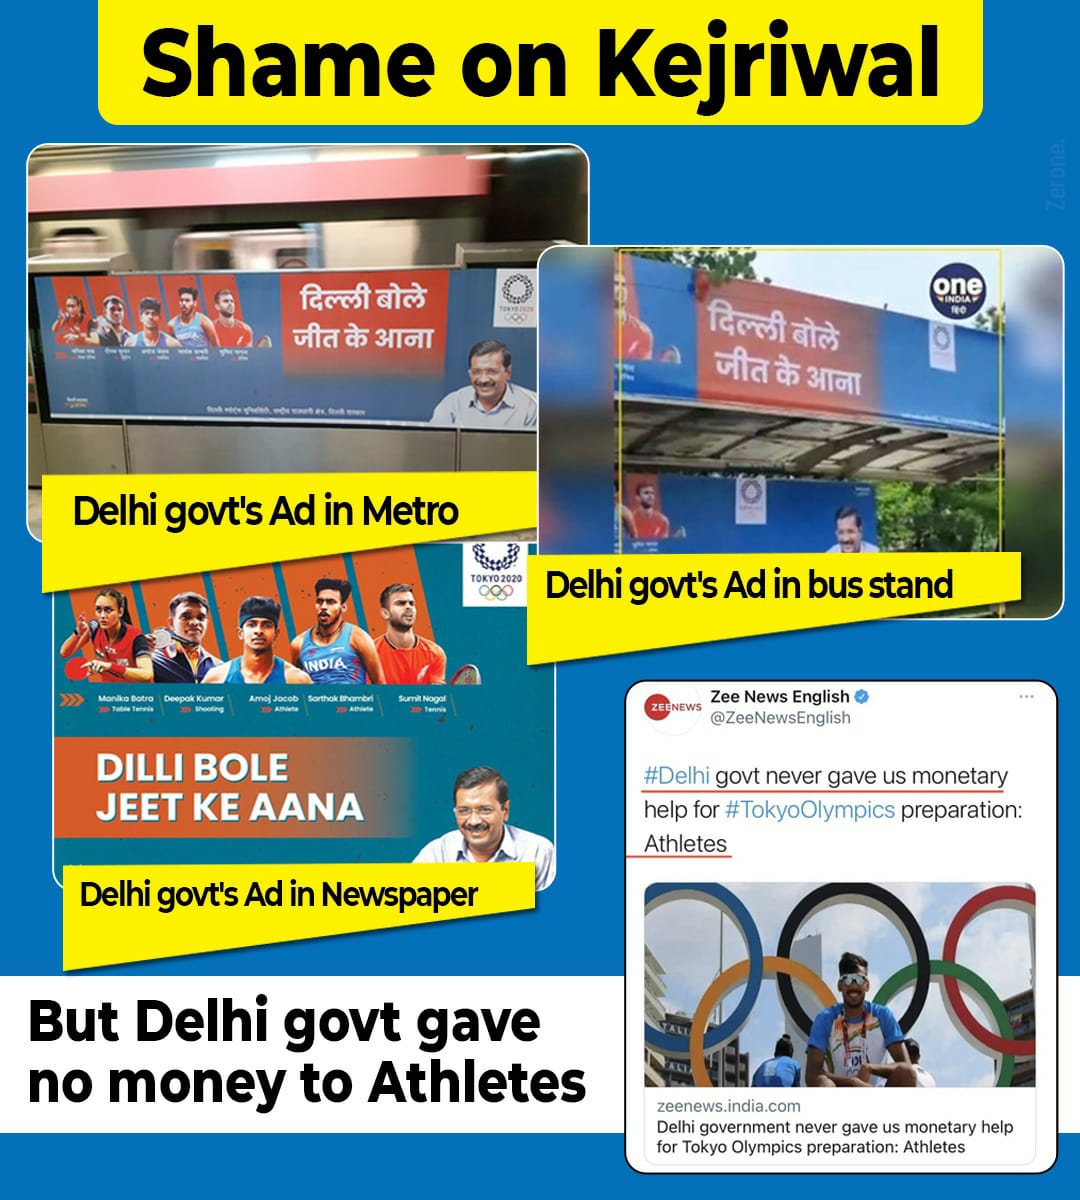 Self Promotion,
Photo Ops,
Marketing gimmick....

Many may call it so. But this is plain shamelessness on #ArvindKejriwal's part.

#kejriwalexposed 
#IndiaAtOlympics